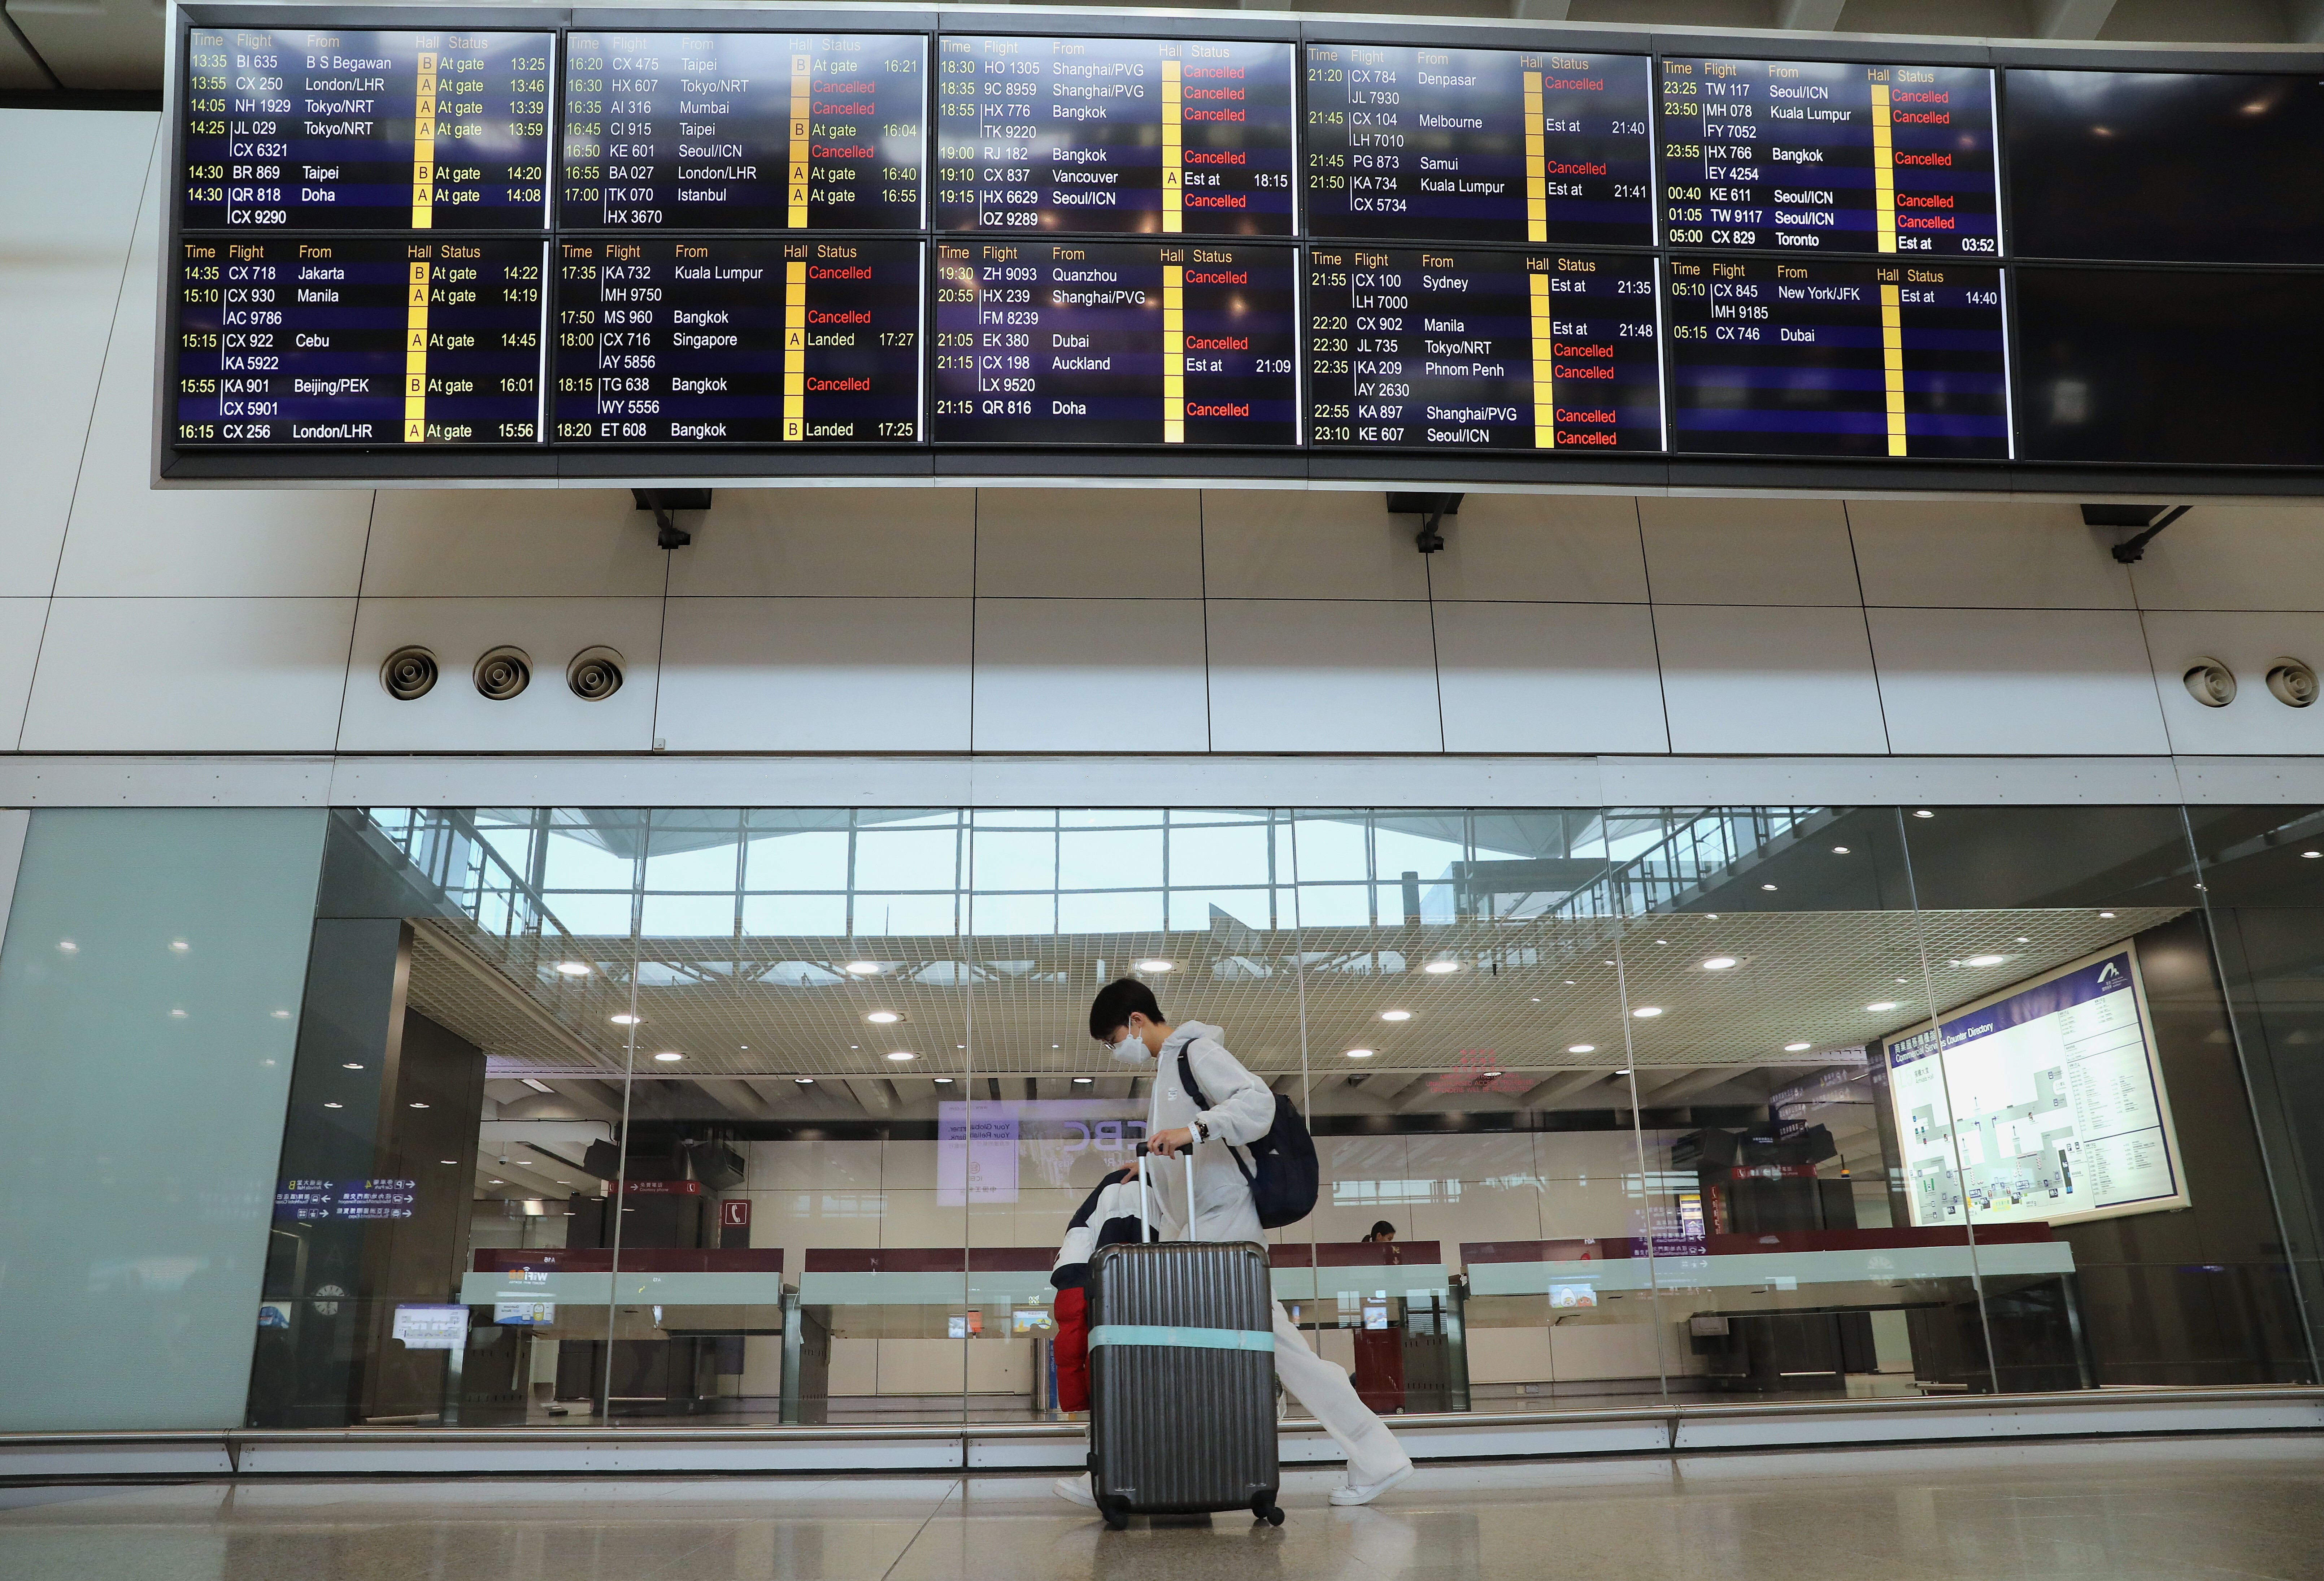 Immigration controls have kept visitors away from Hong Kong and elsewhere amid the coronavirus pandemic, inflicting losses on the hotel industry. Photo: Winson Wong